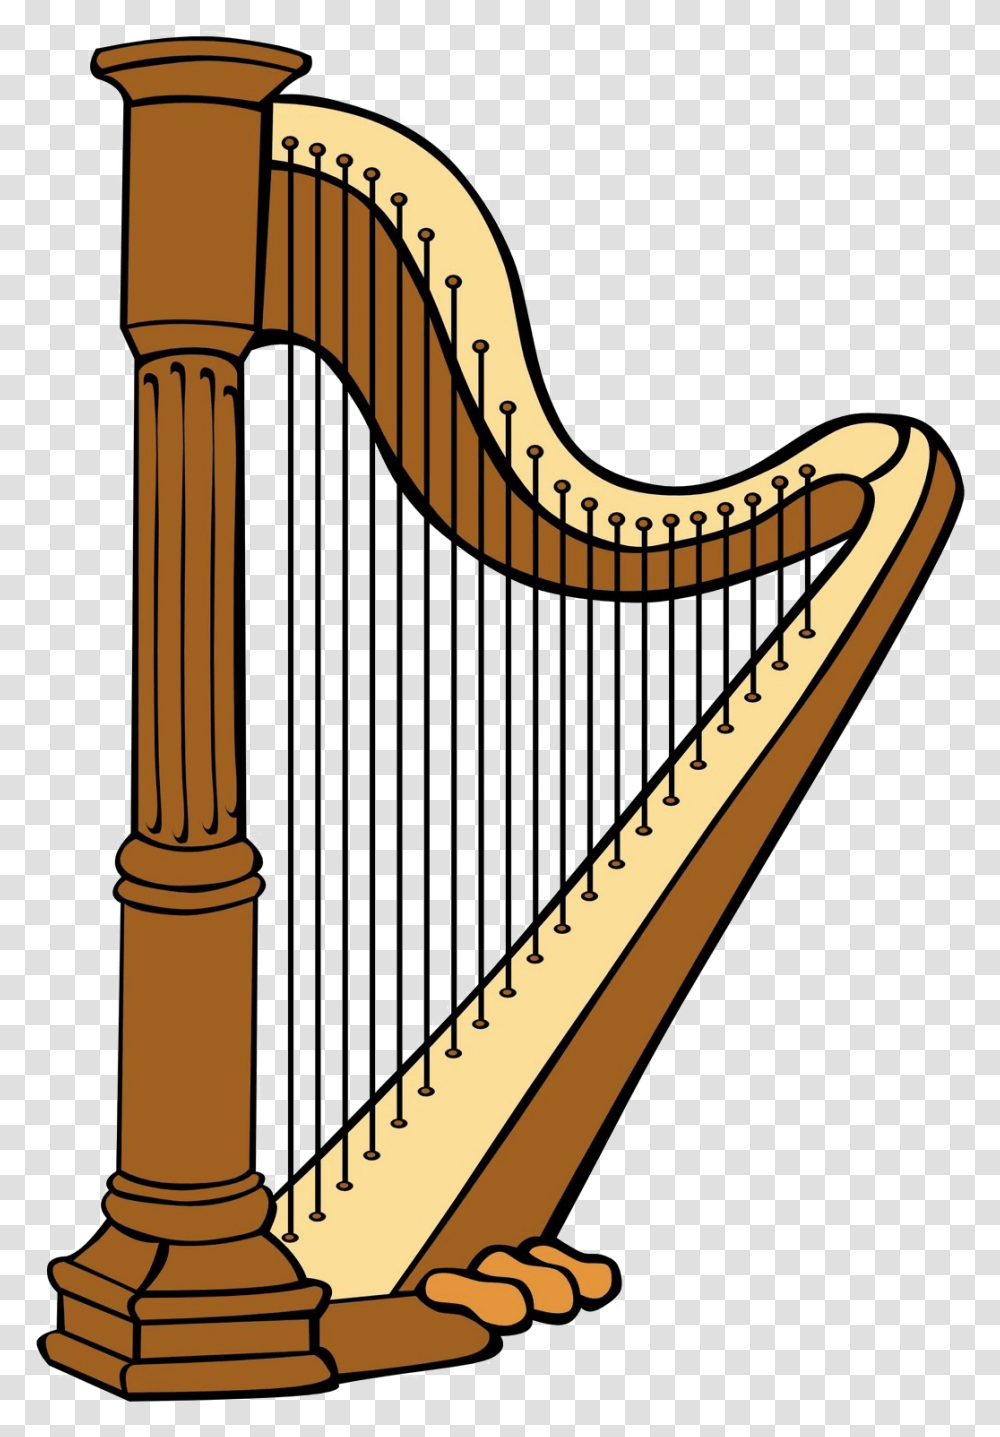 Harp Image With Background Cartoon Clipart Harp, Musical Instrument, Staircase, Lyre, Leisure Activities Transparent Png